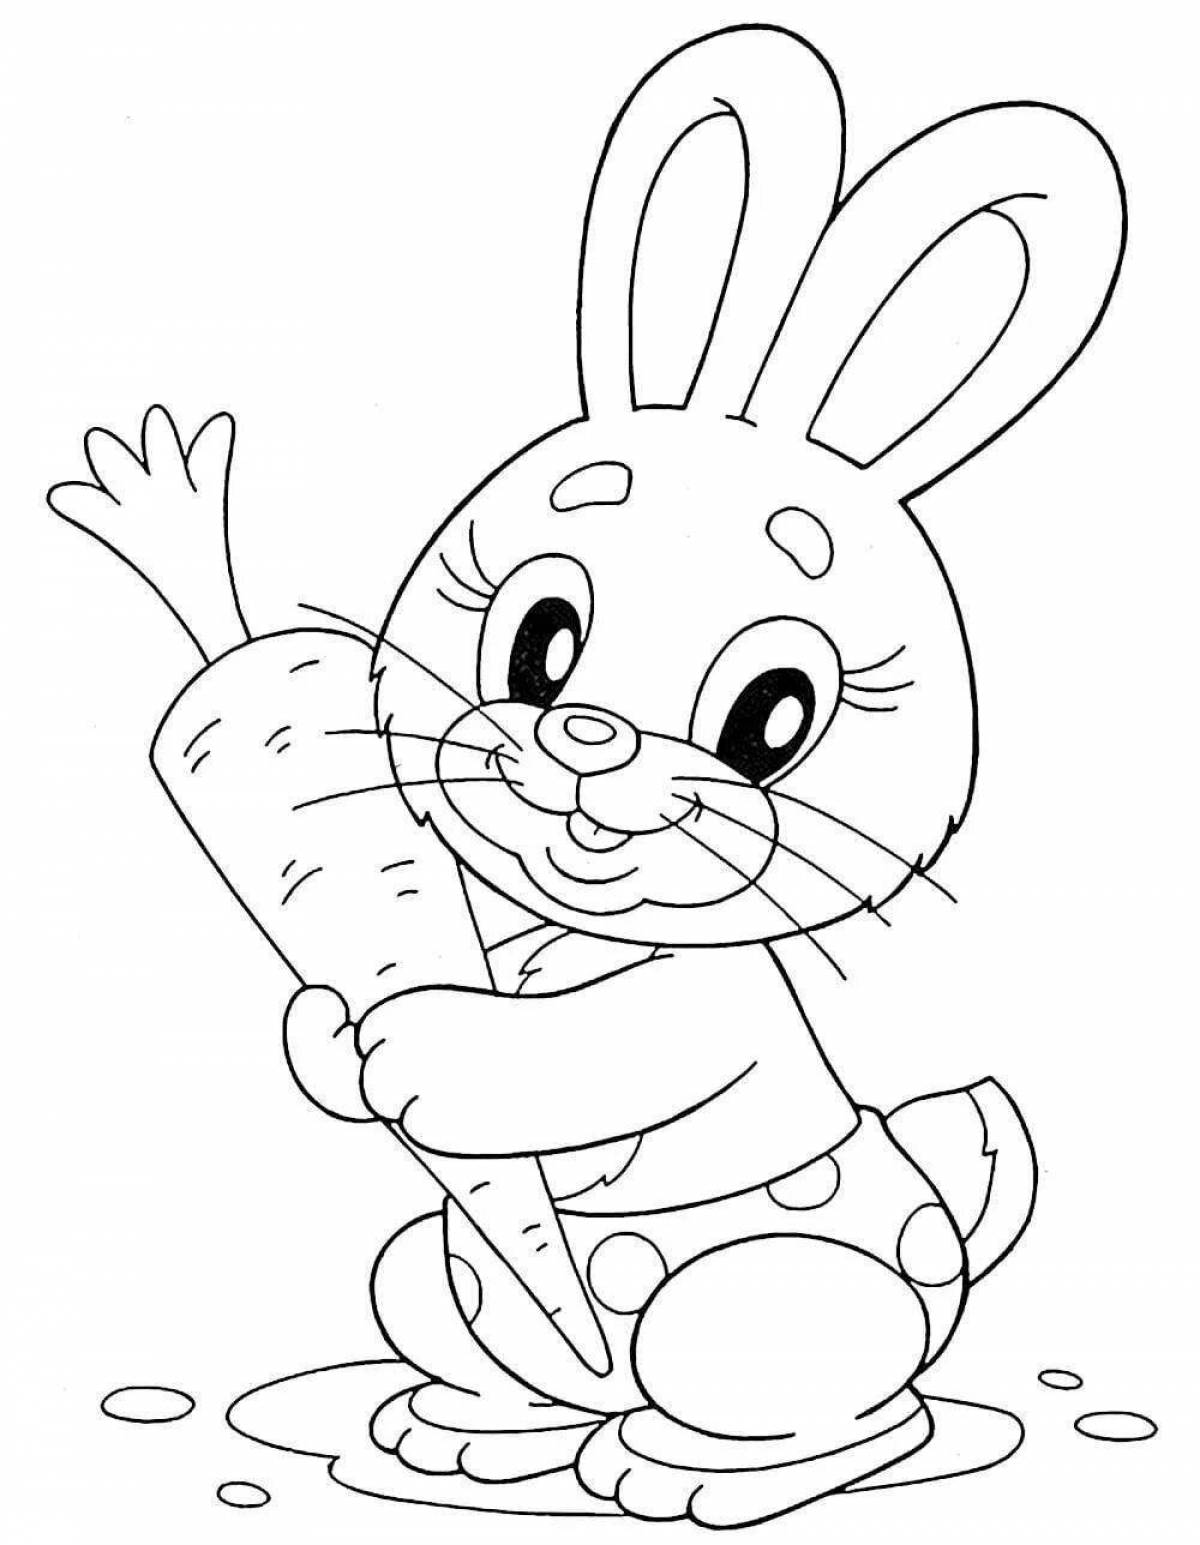 Outstanding rabbit coloring book for 2 year olds